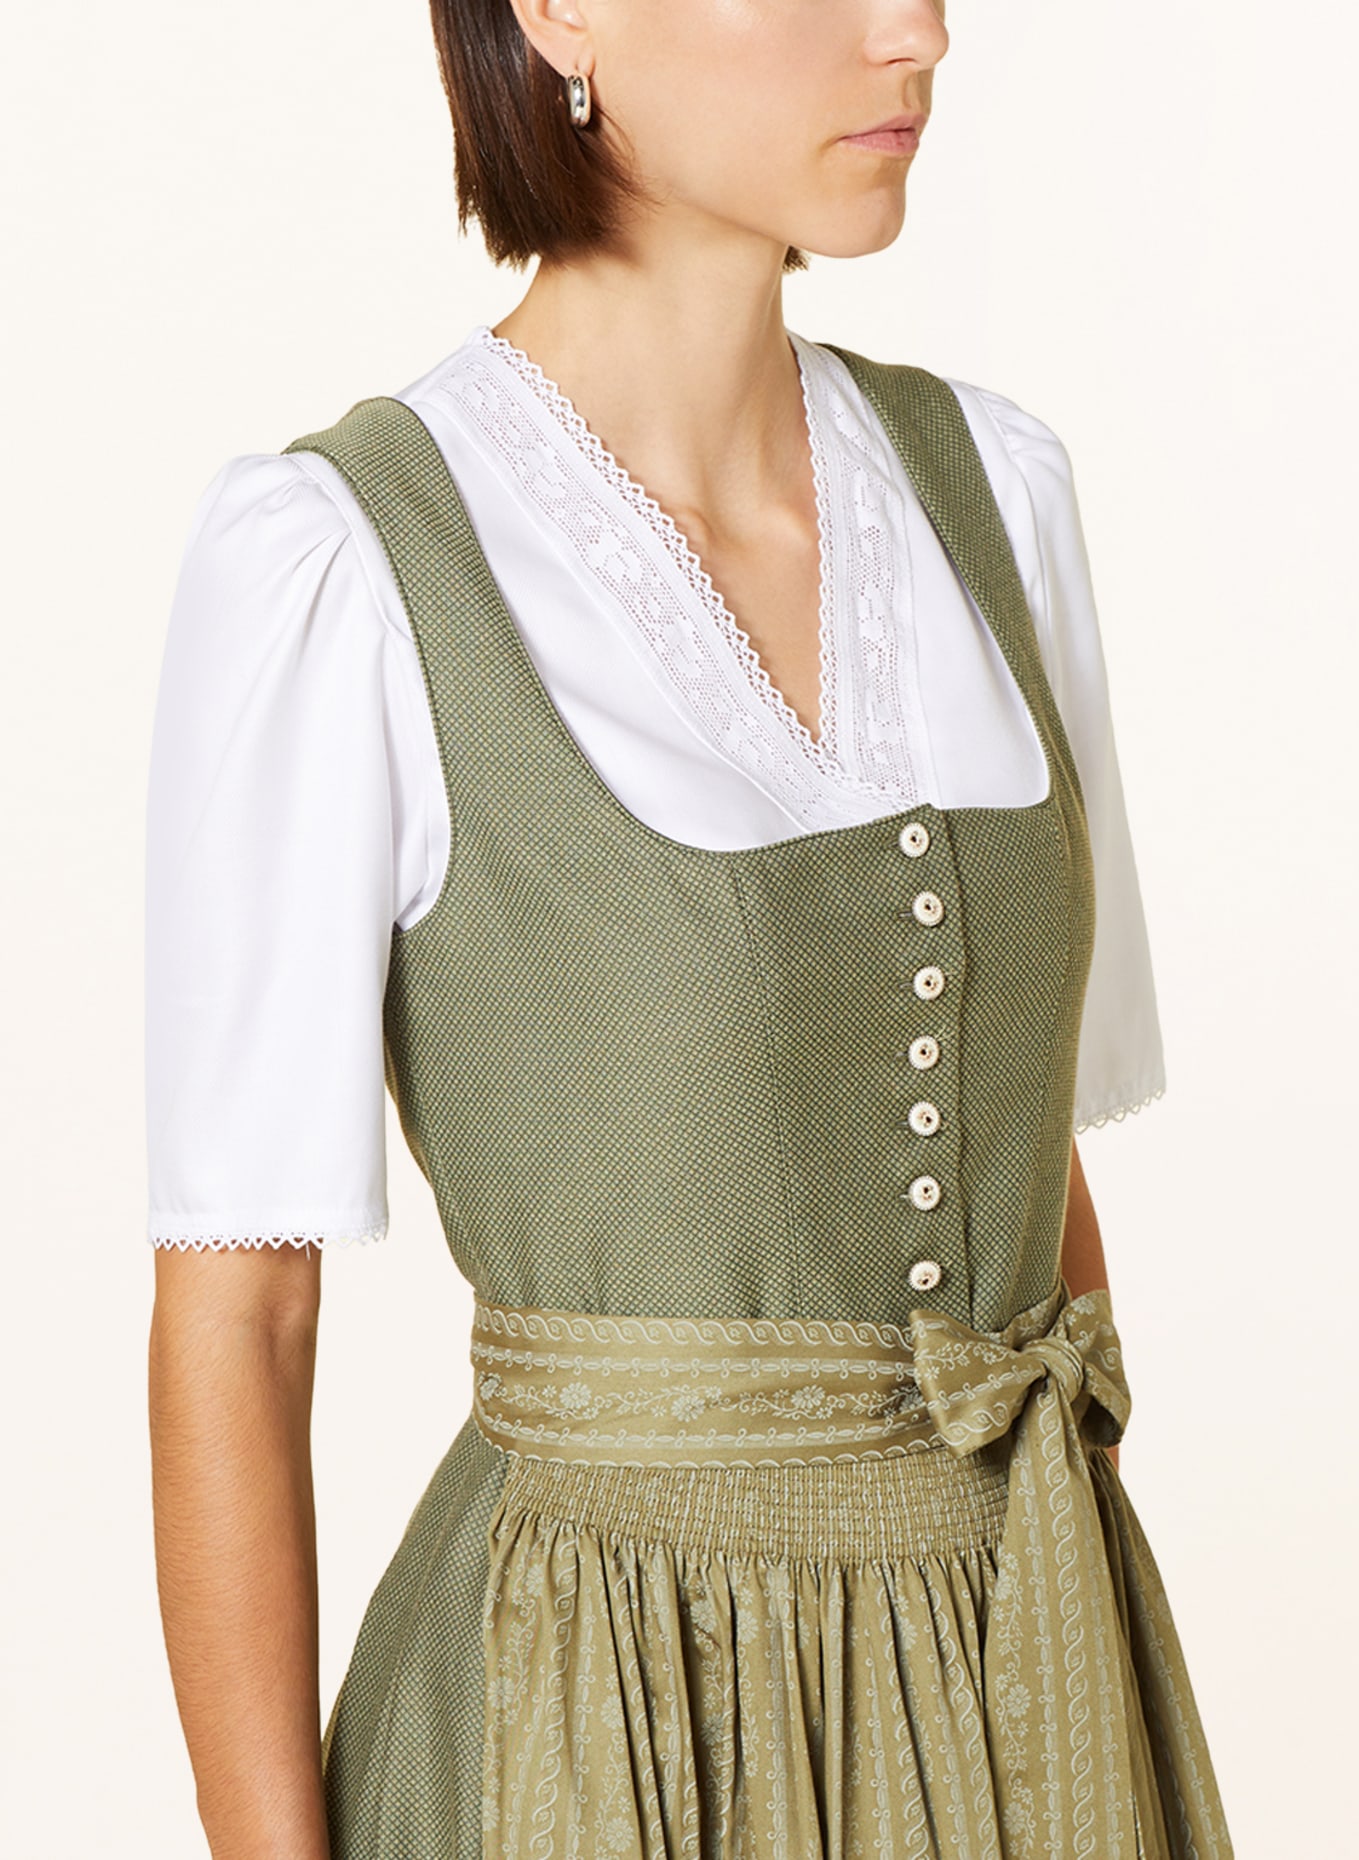 BERWIN & WOLFF Dirndl blouse with crochet lace, Color: WHITE (Image 3)